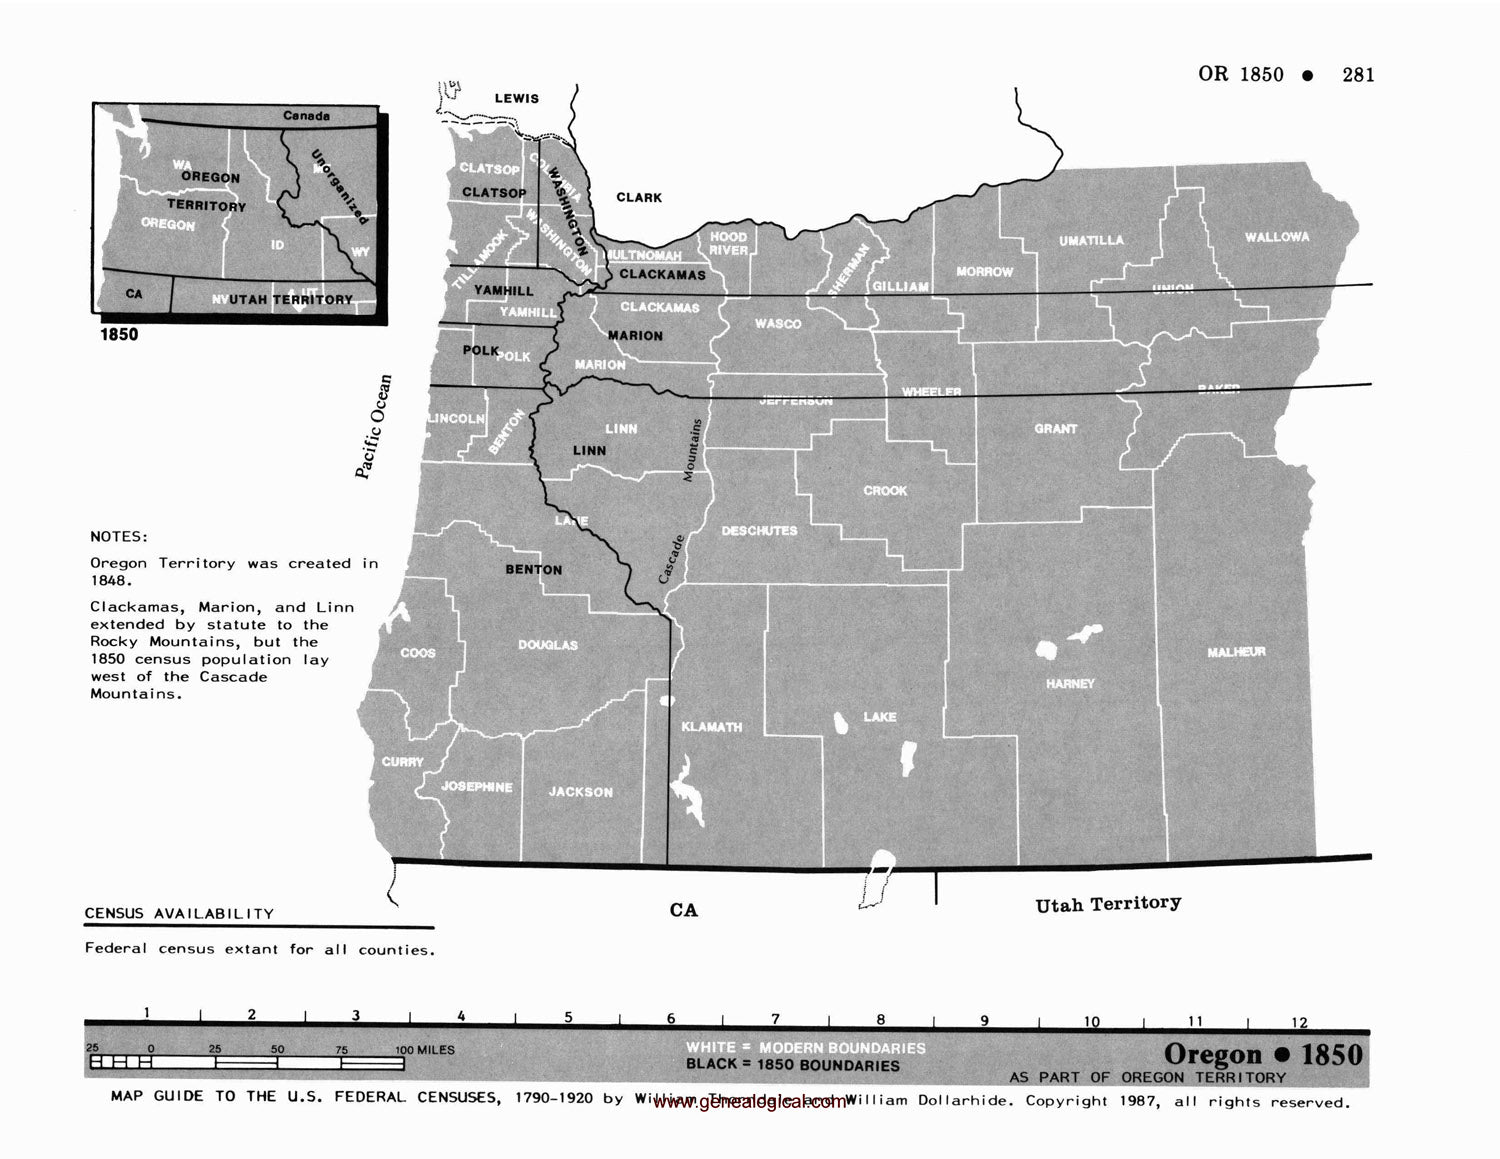 Map Guide To The U.S. Federal Censuses, Oregon 1850 -1920 Map Packet